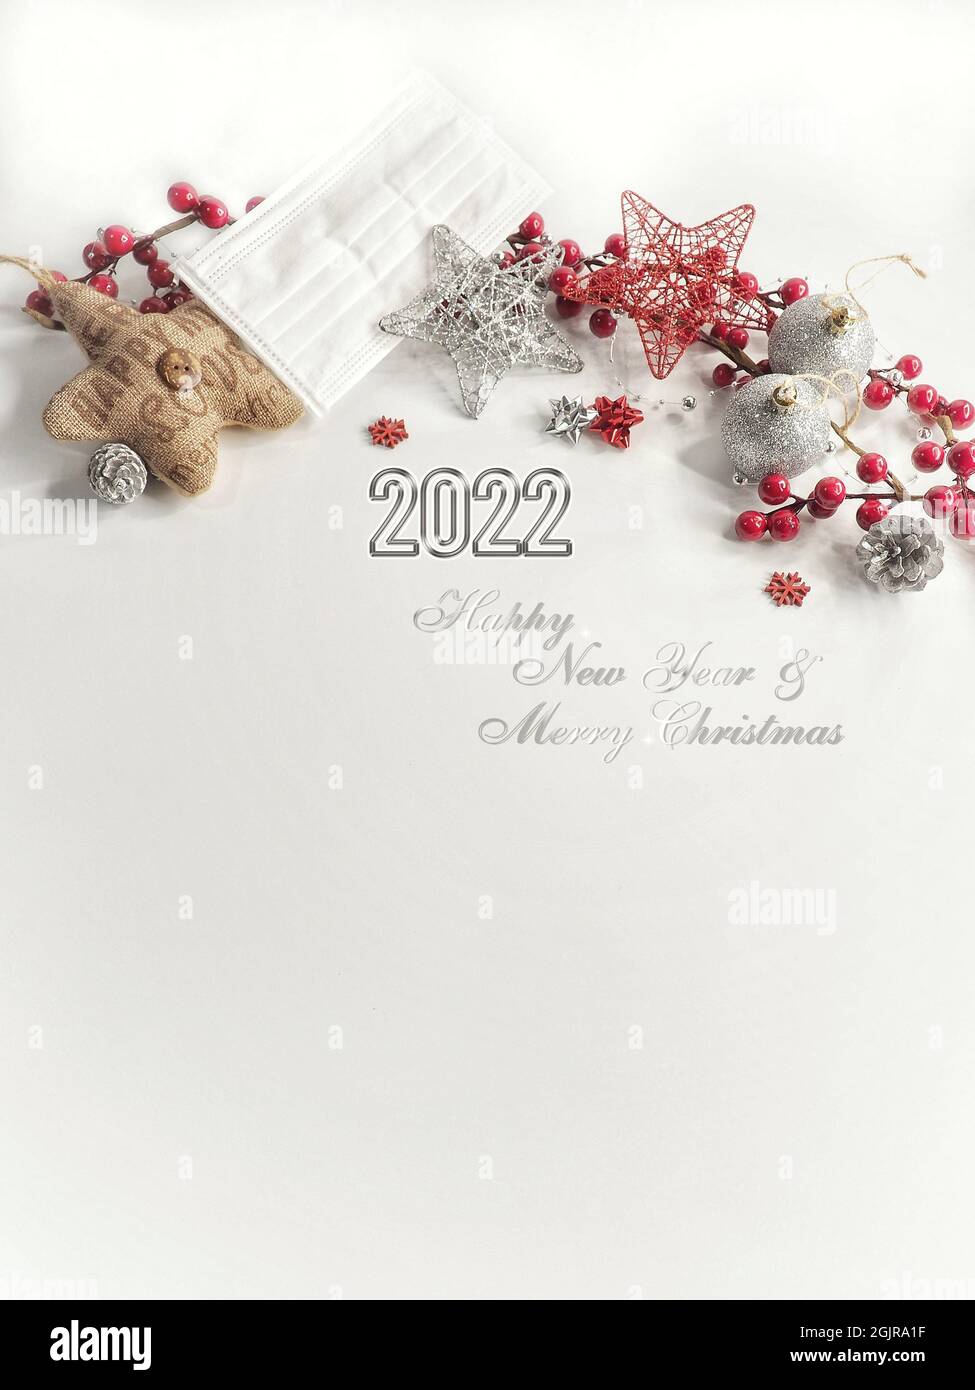 Merry Christmas and happy new year 2022 greeting card Stock Photo